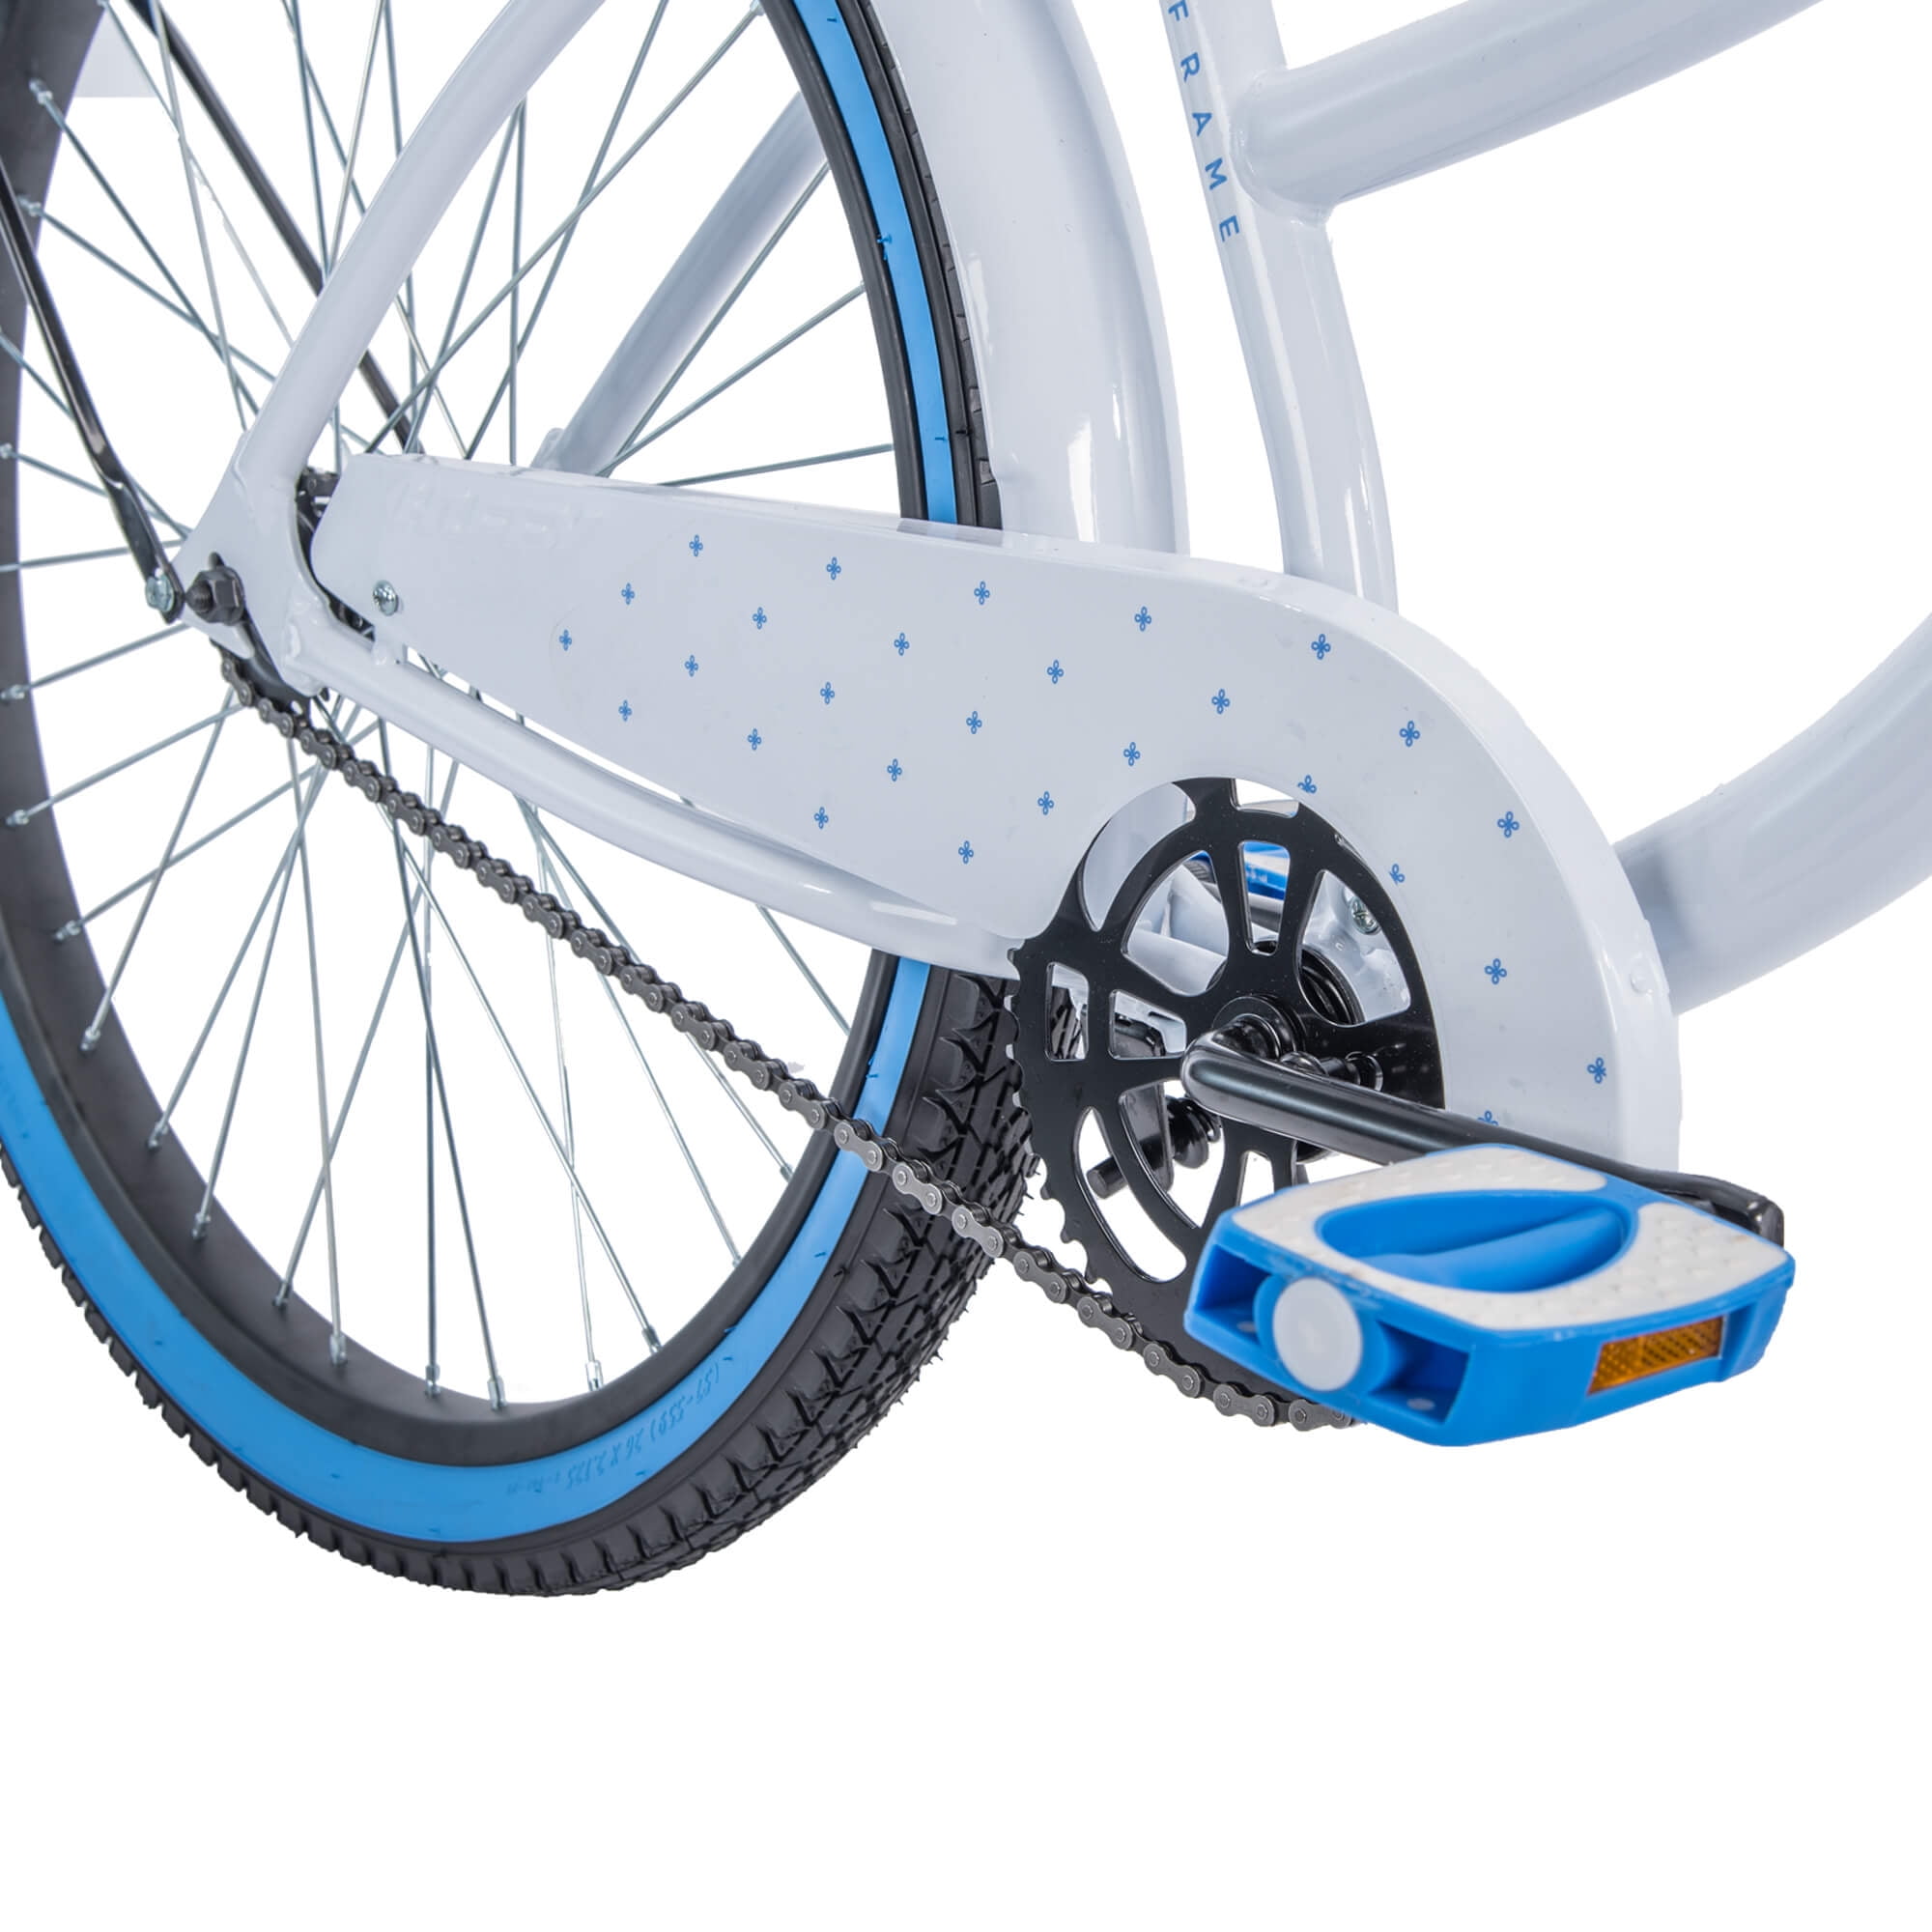 Best Huffy Cranbrook Bike Accessories to Buy in 2022